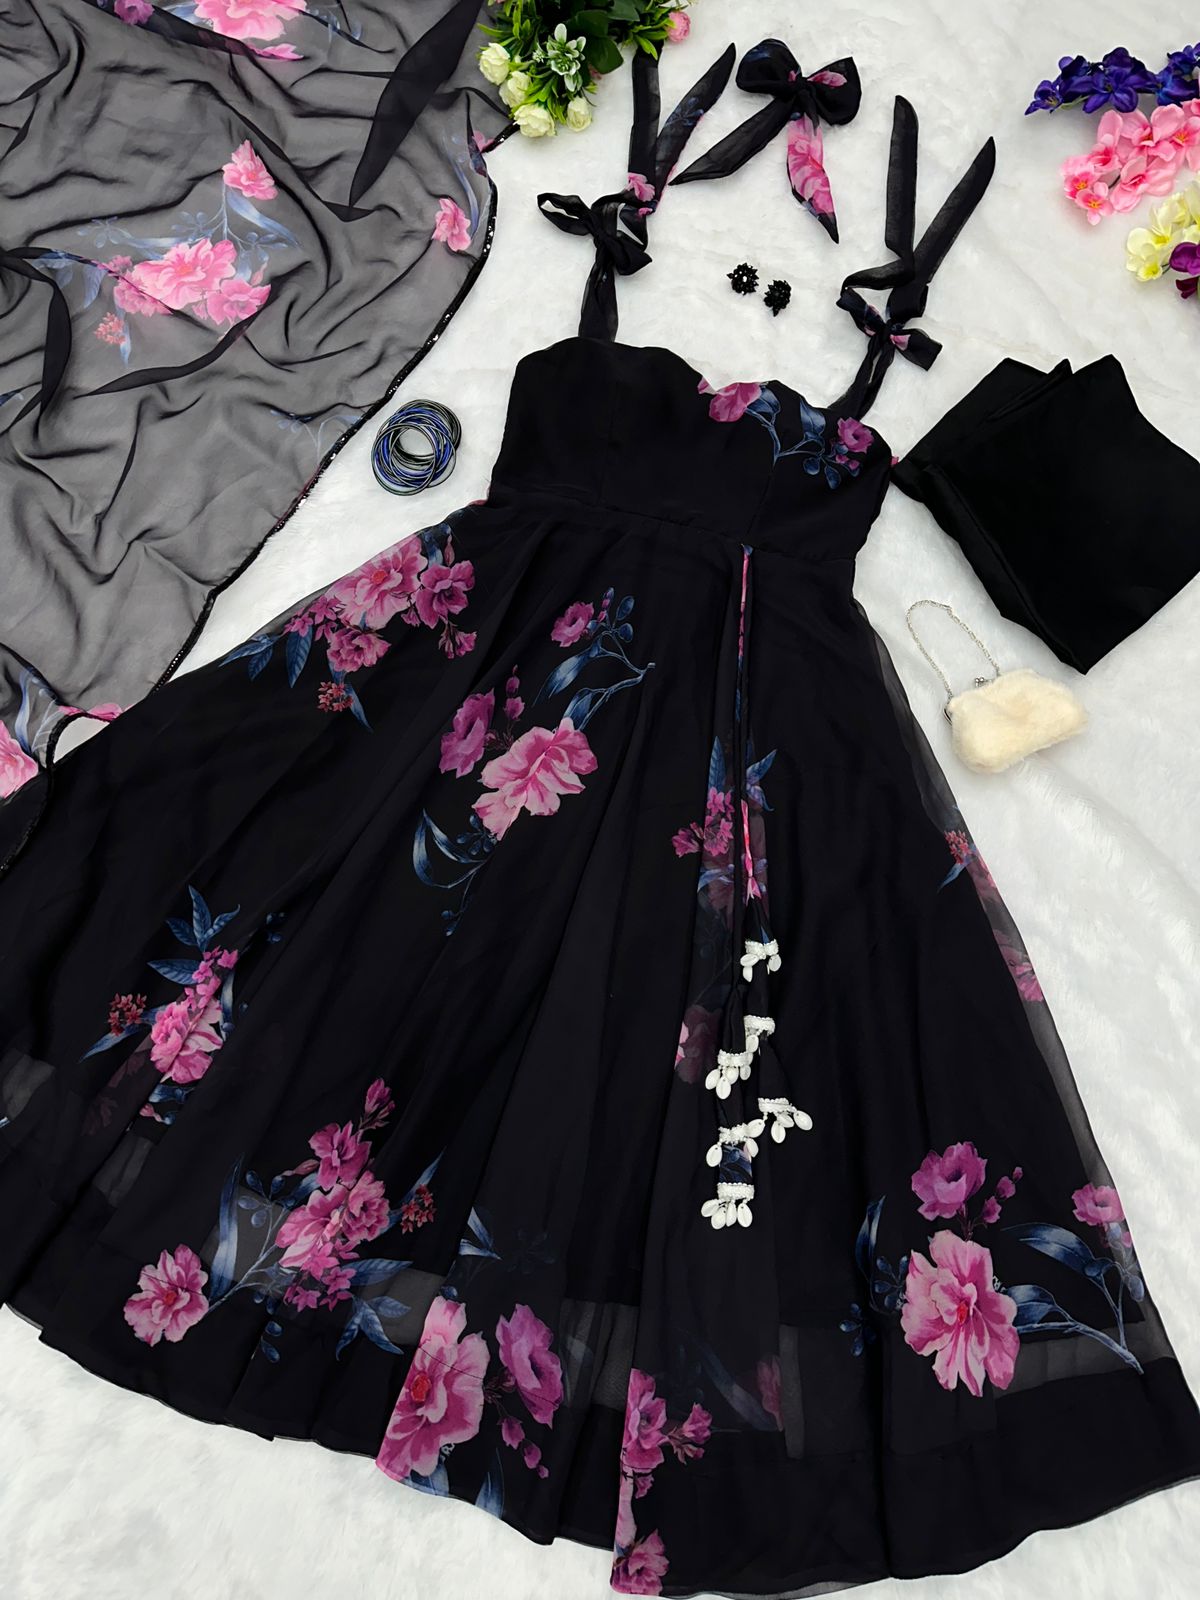 Yes the long black dress with flowers embroidered on it is appropriate for  a formal wedding lol : r/Weddingattireapproval